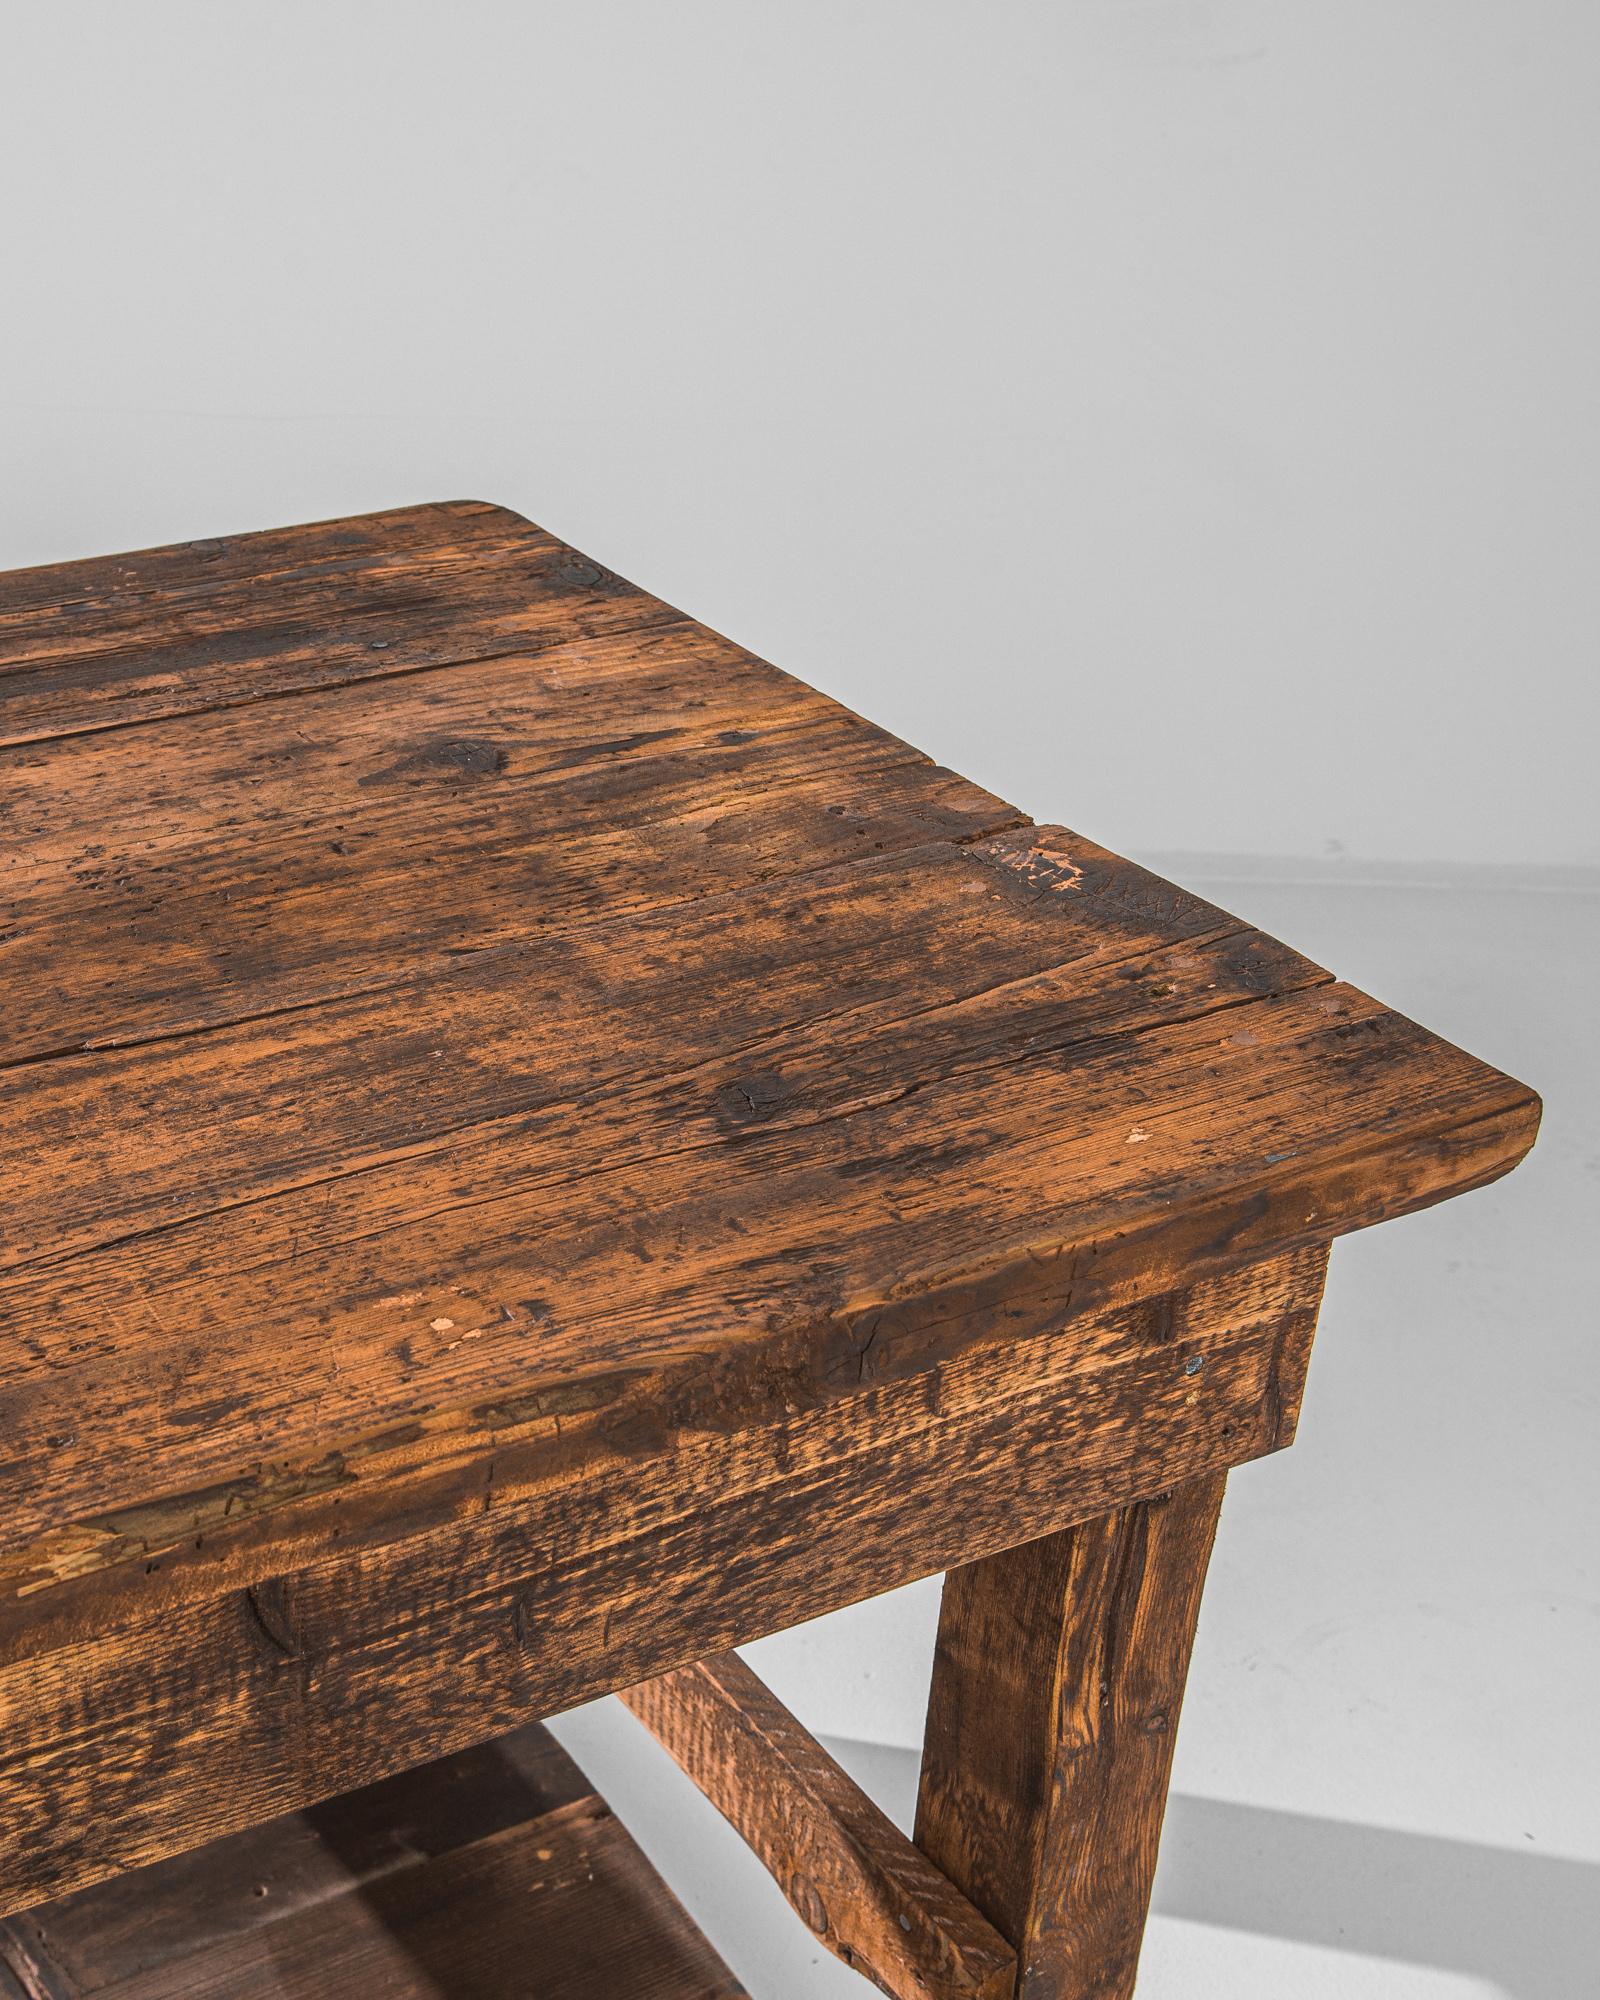 A wooden table from Czechia, produced circa 1950. A vintage work table rustically constructed, nicked with scars of a long lifetime of usage, featuring a three plank tabletop and a lower storage shelf. Sturdy and broad, this piece is supported by